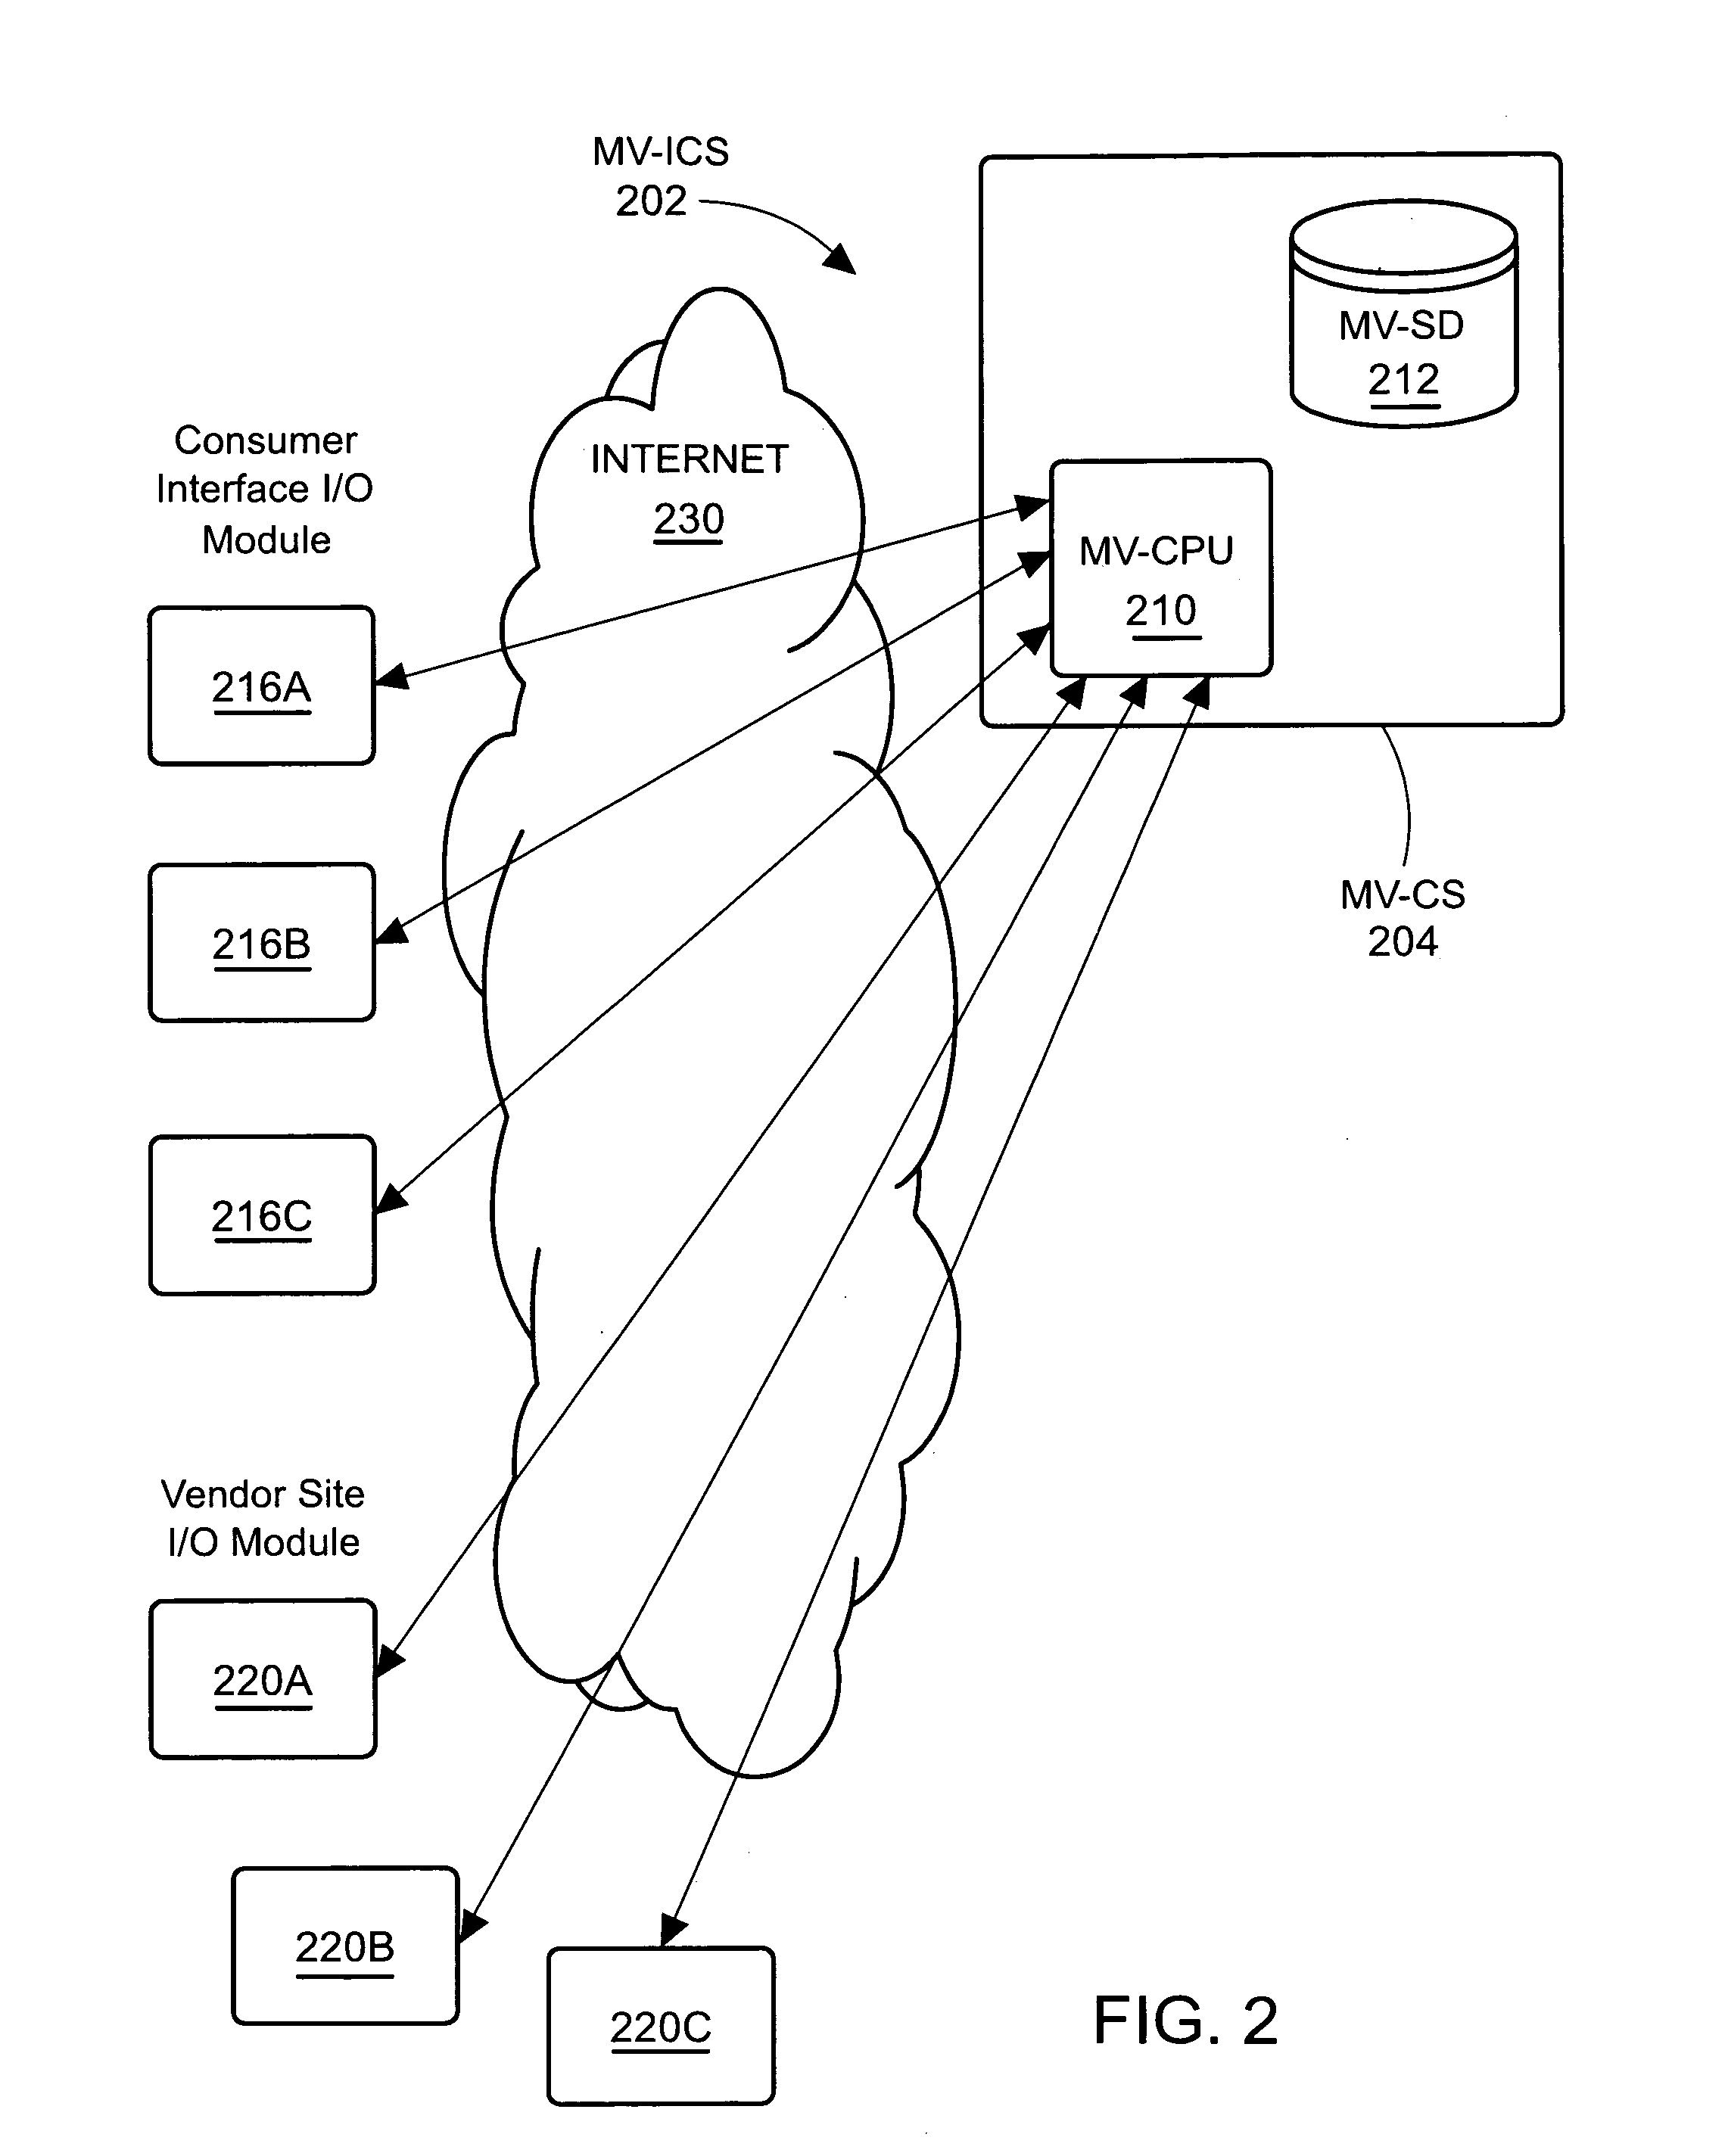 Multi-vendor internet commerce system for e-commerce applications and methods therefor